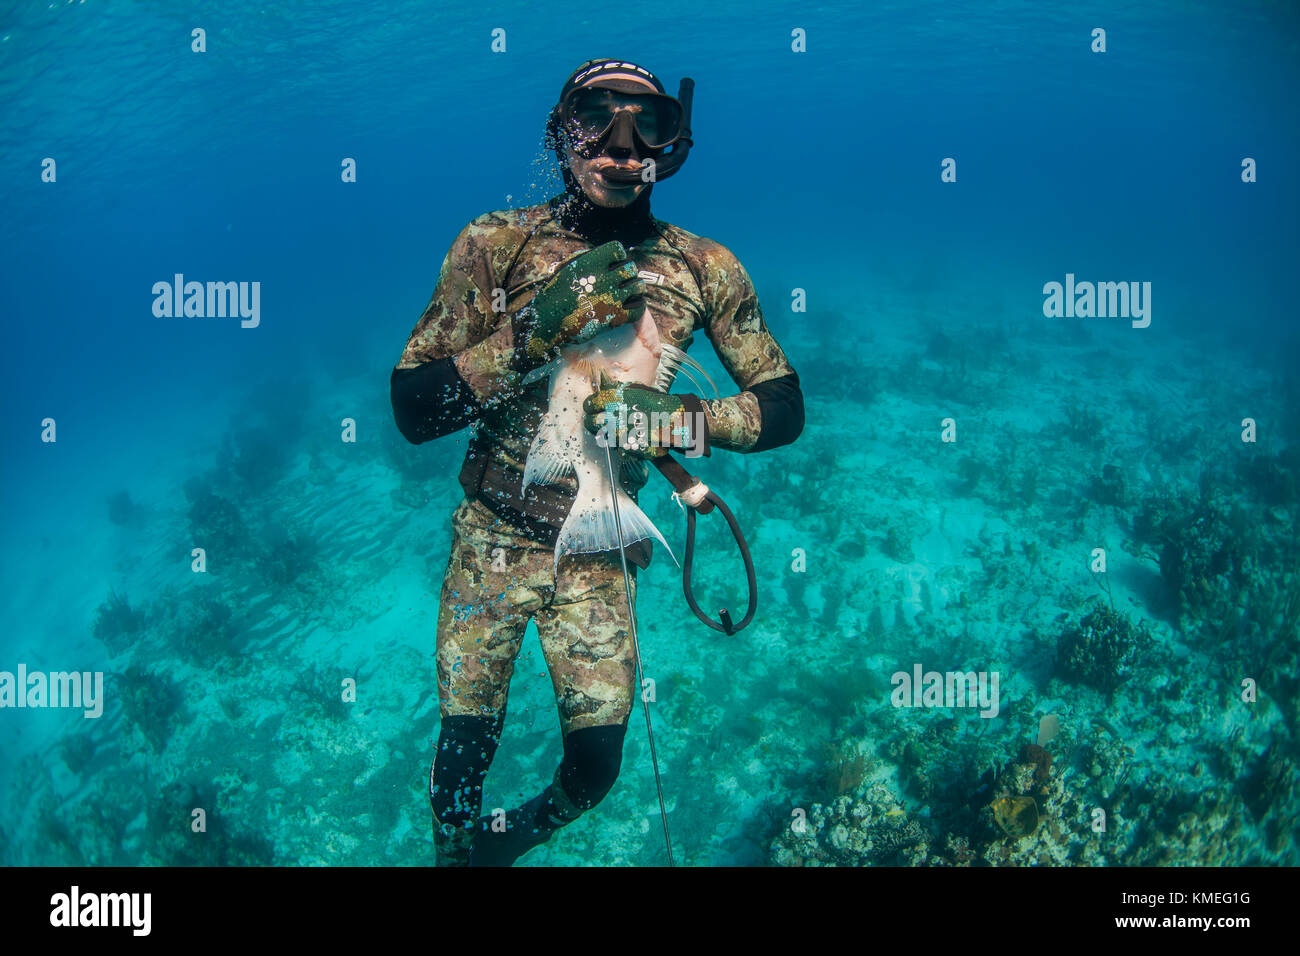 Front view of diver holding caught hogfish underwater while spearfishing, Clarence Town, Long Island, Bahamas Stock Photo